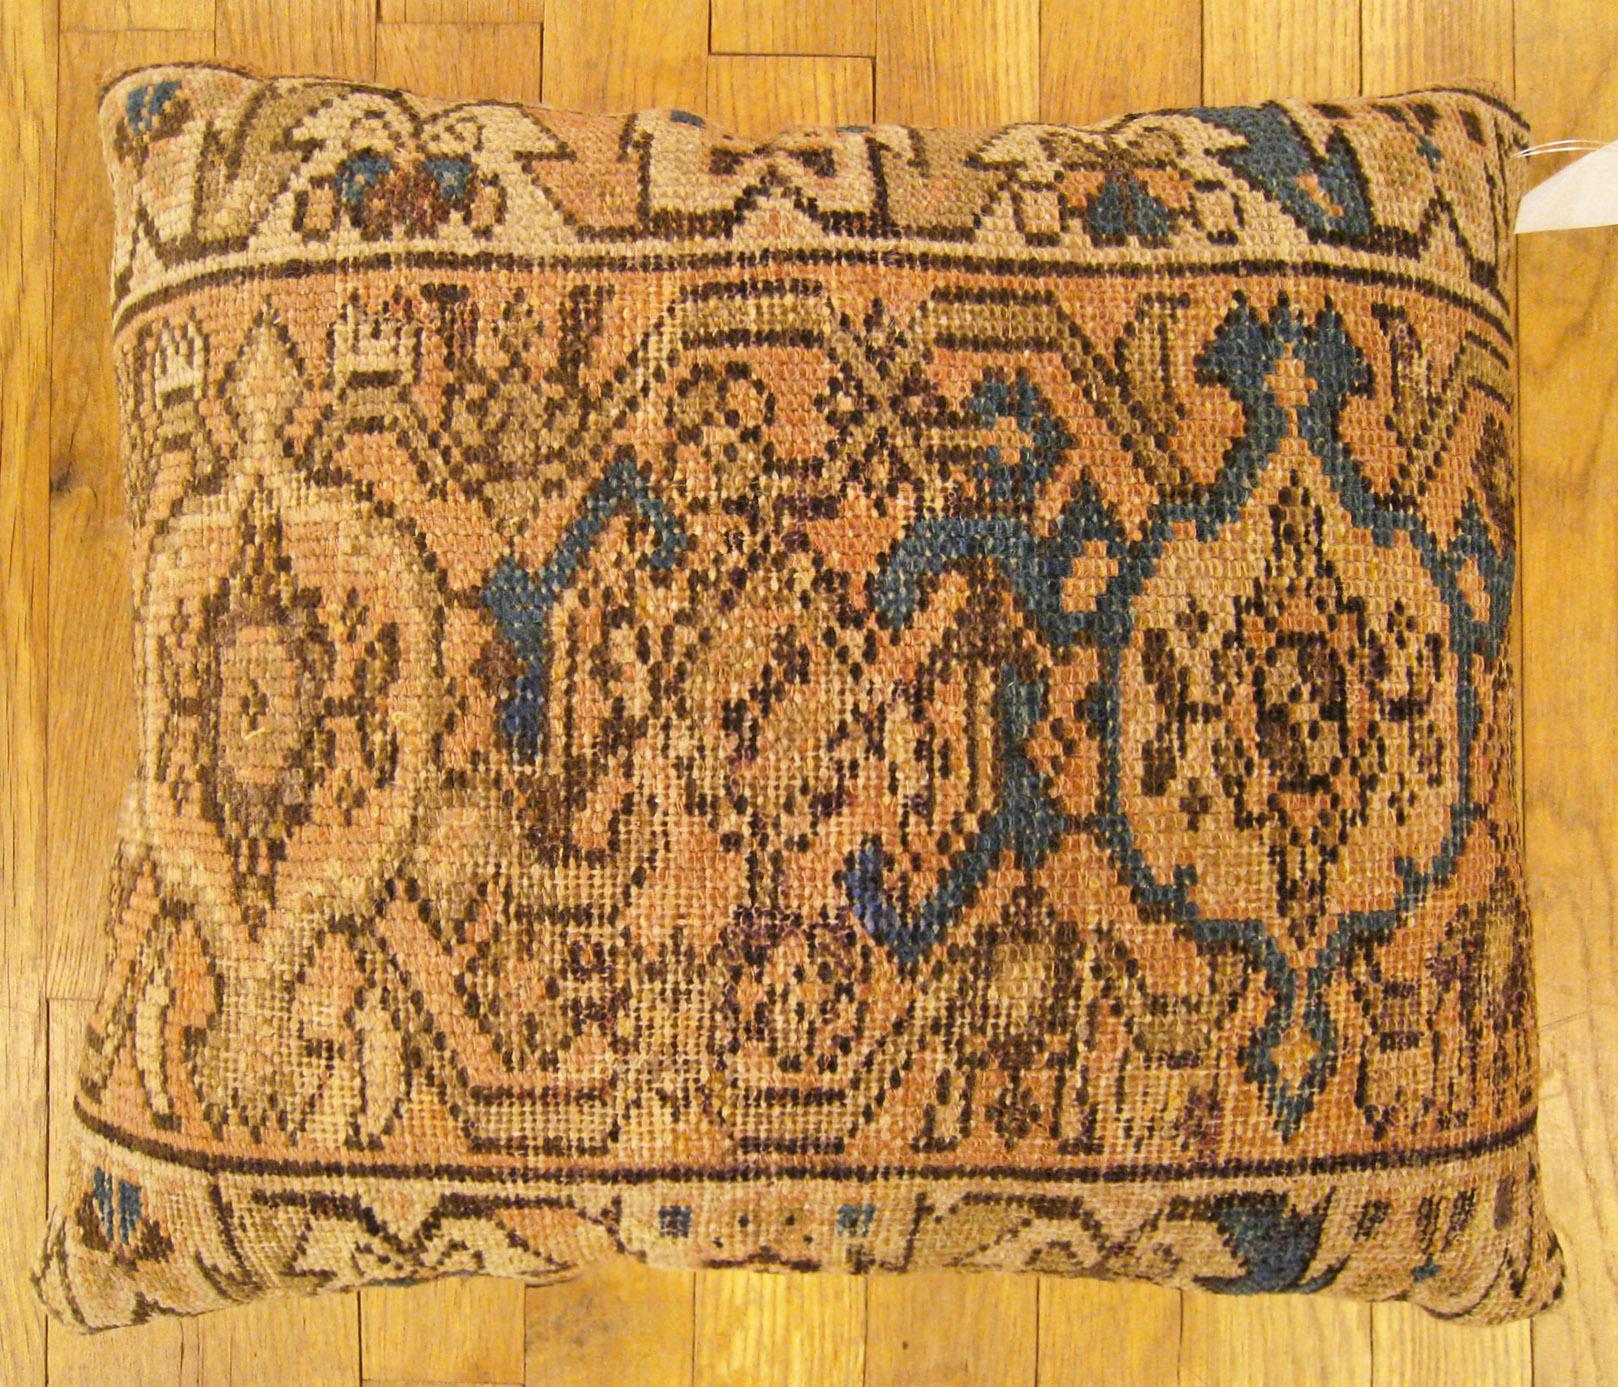 Antique Persian hamadan rug pillow; size 1'8” x 1'4”.

An antique decorative pillow with geometric abstracts allover a light brown central field, size 1'8” x 1'4”. This lovely decorative pillow features an antique fabric of a Hamadan rug on front